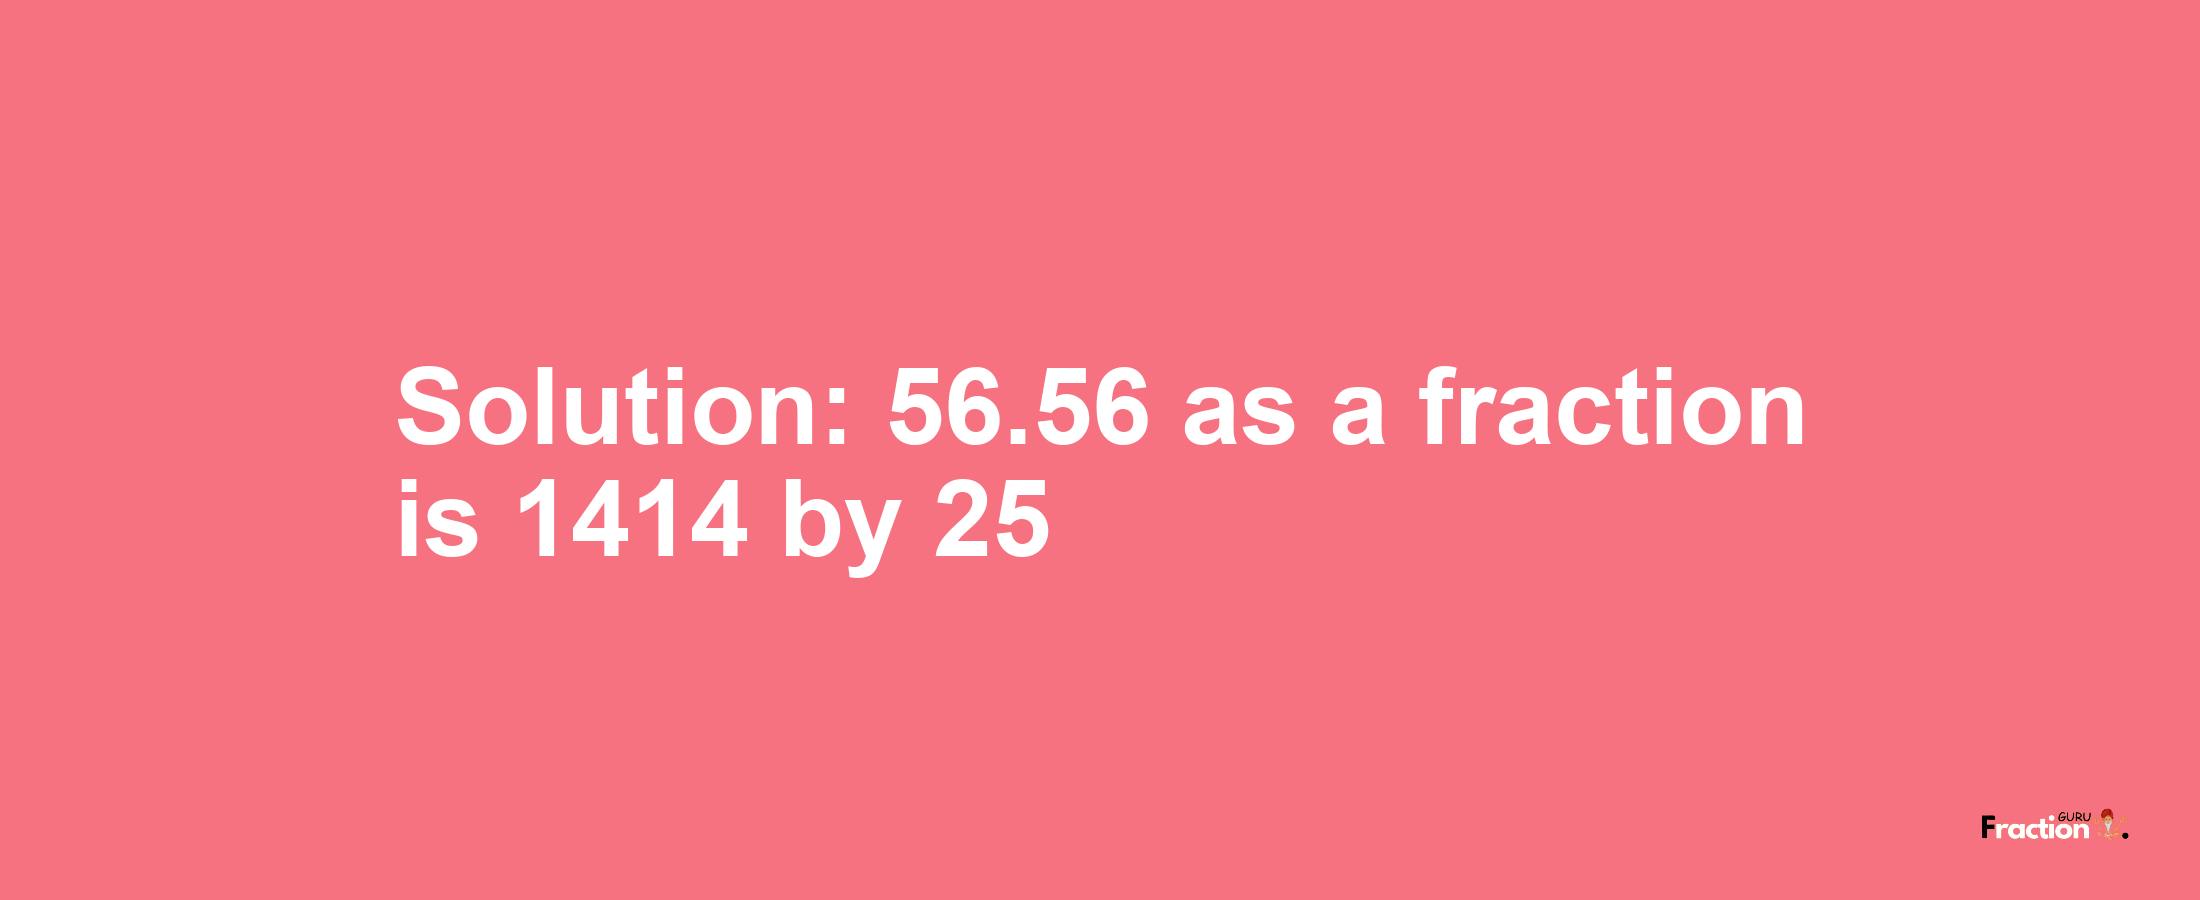 Solution:56.56 as a fraction is 1414/25